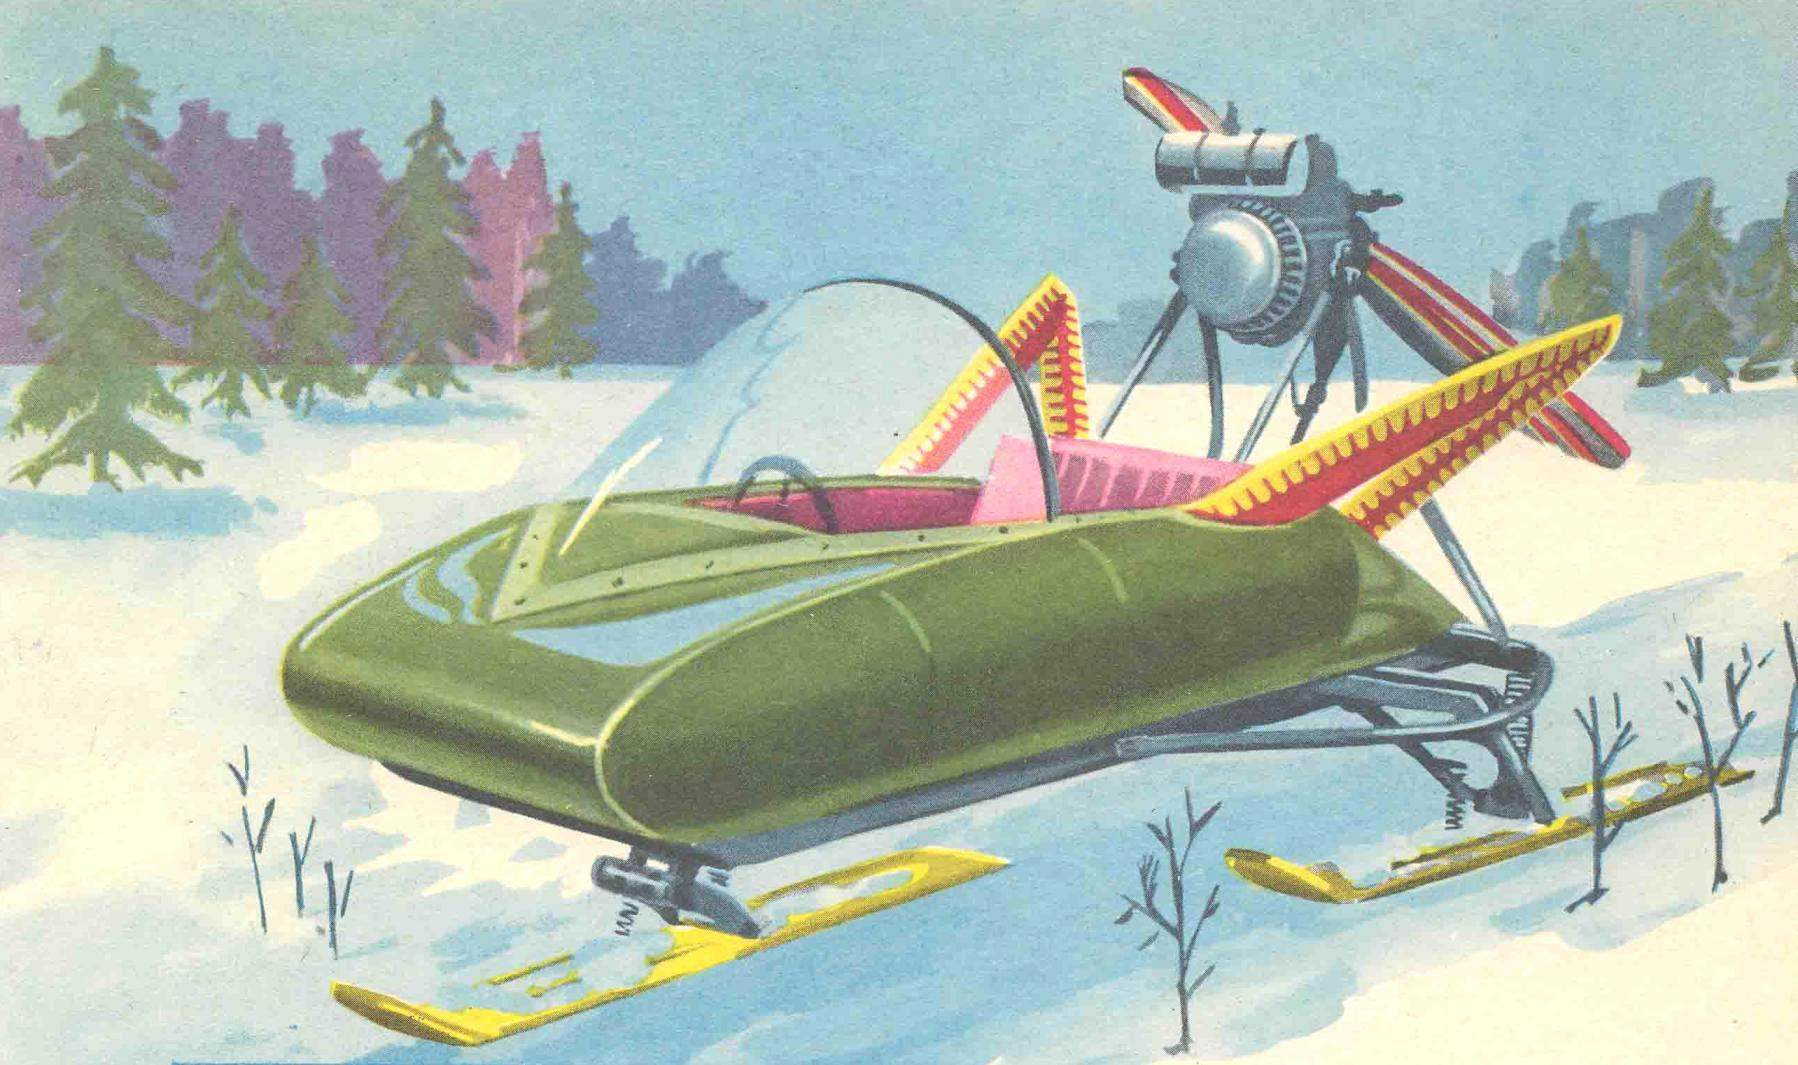 SNOWMOBILE: IDEAS AND DESIGNS